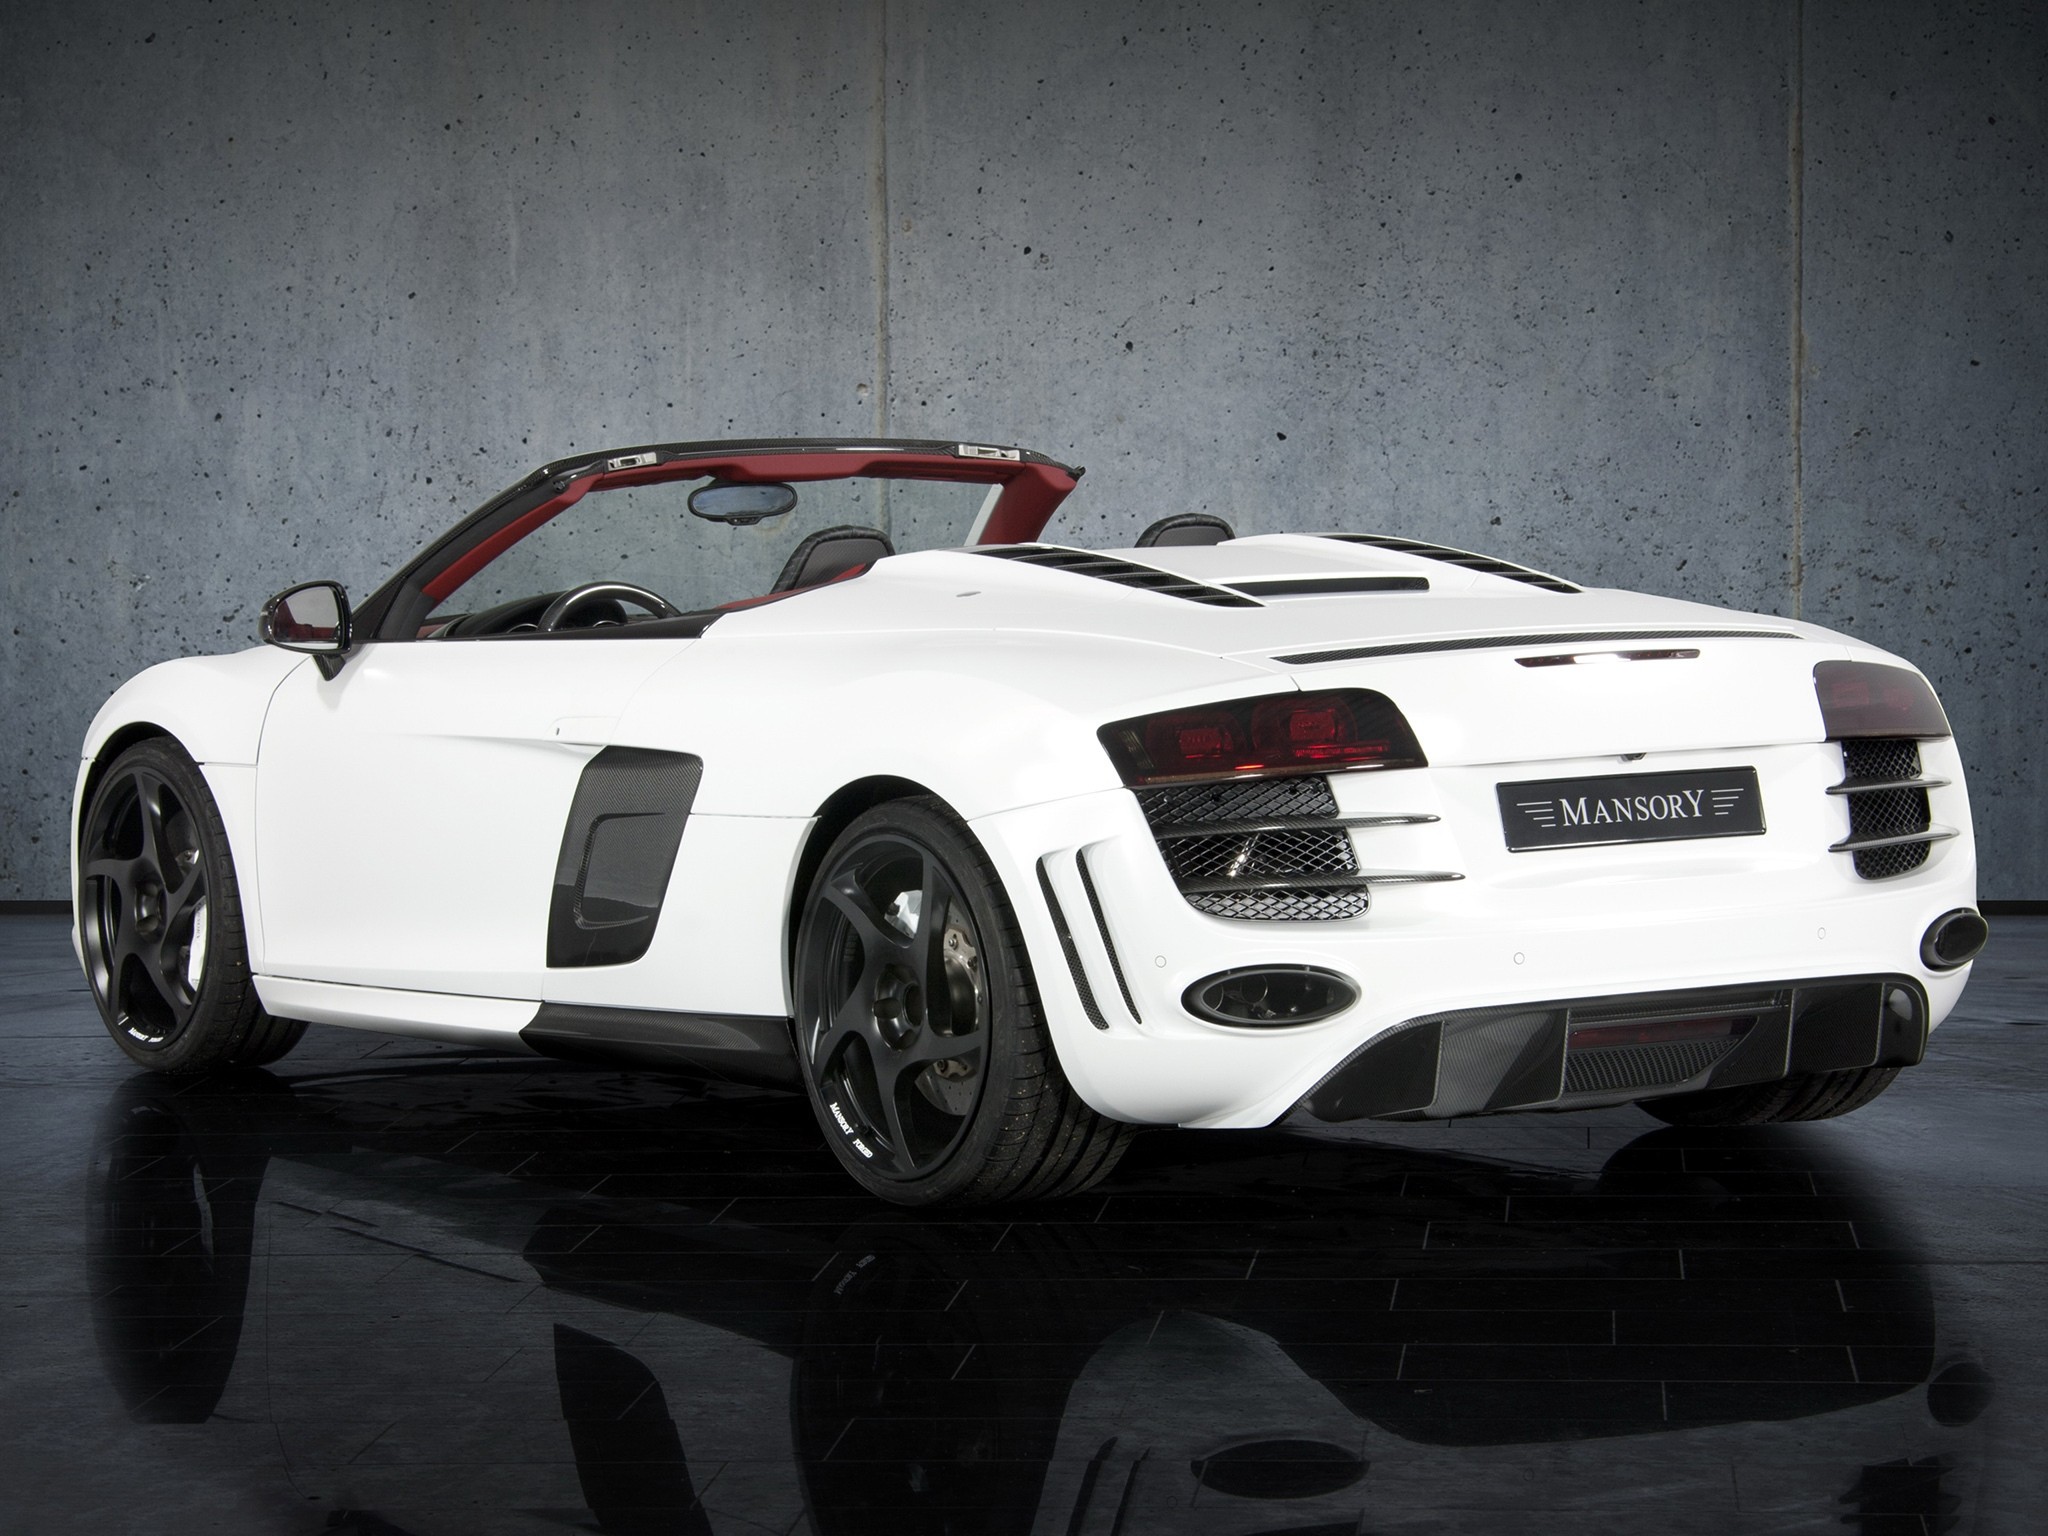 98063 download wallpaper auto, cars, white, back view, rear view, r8, mansory, spyder screensavers and pictures for free